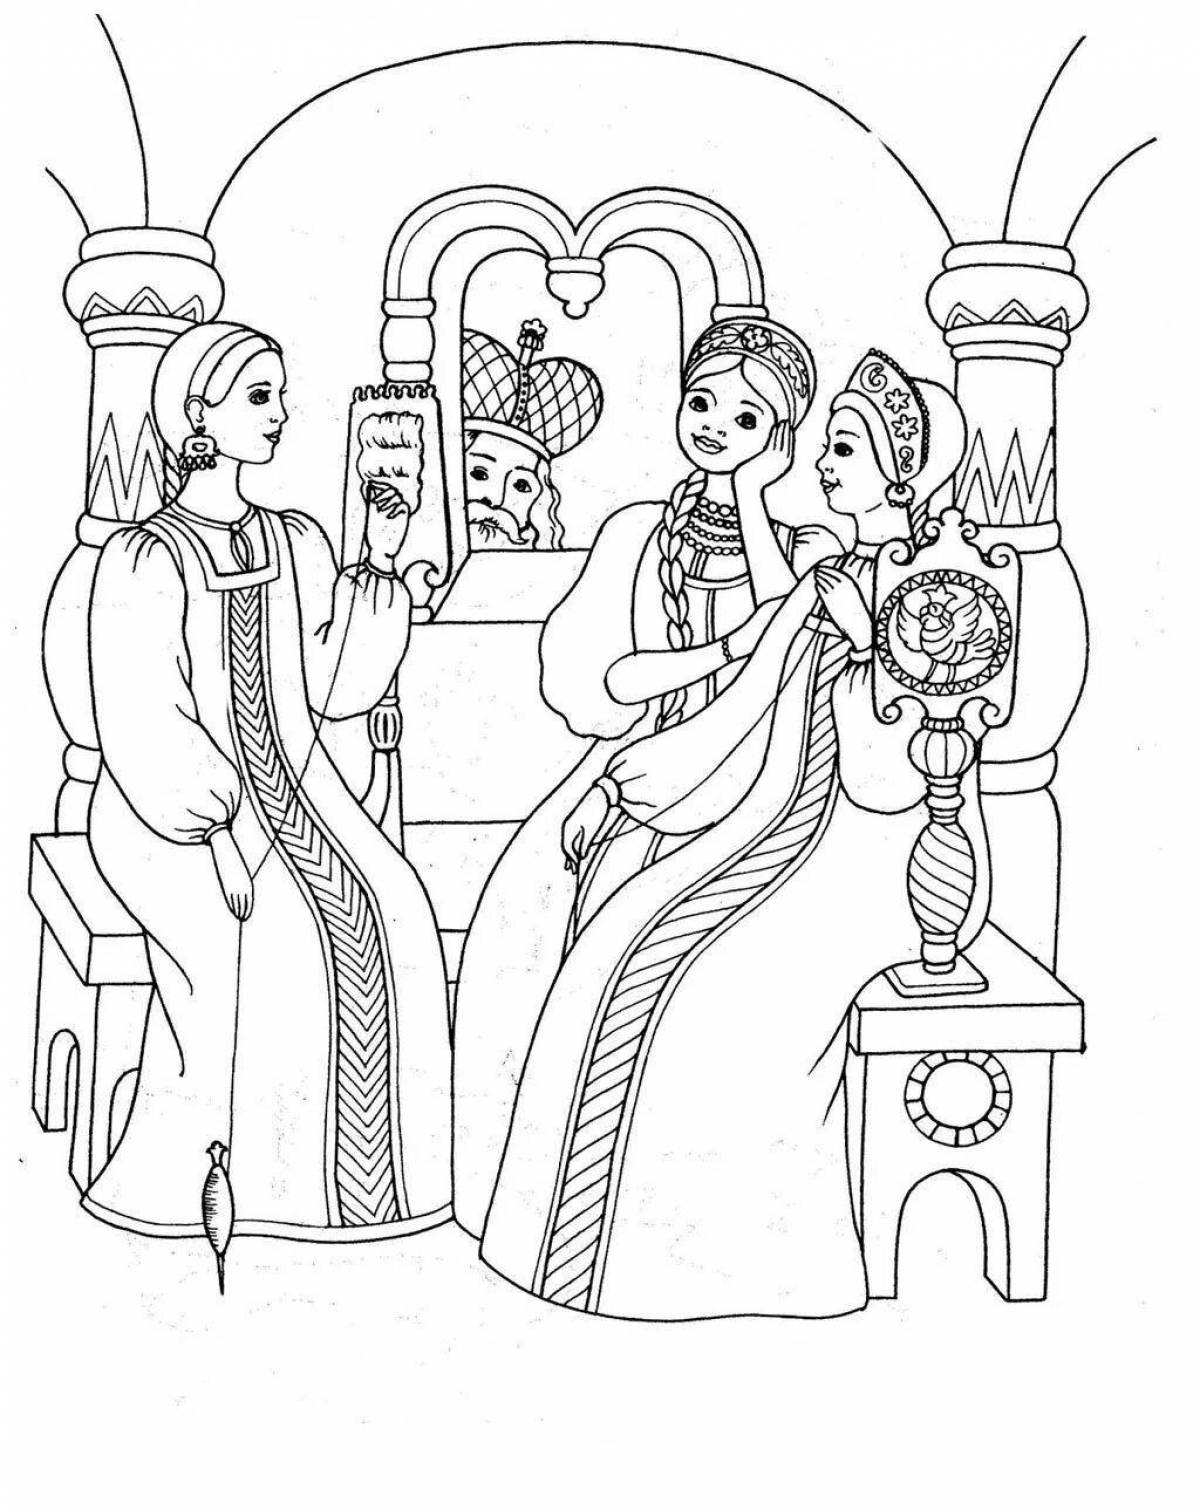 Fairytale coloring book based on Pushkin's fairy tales for preschoolers